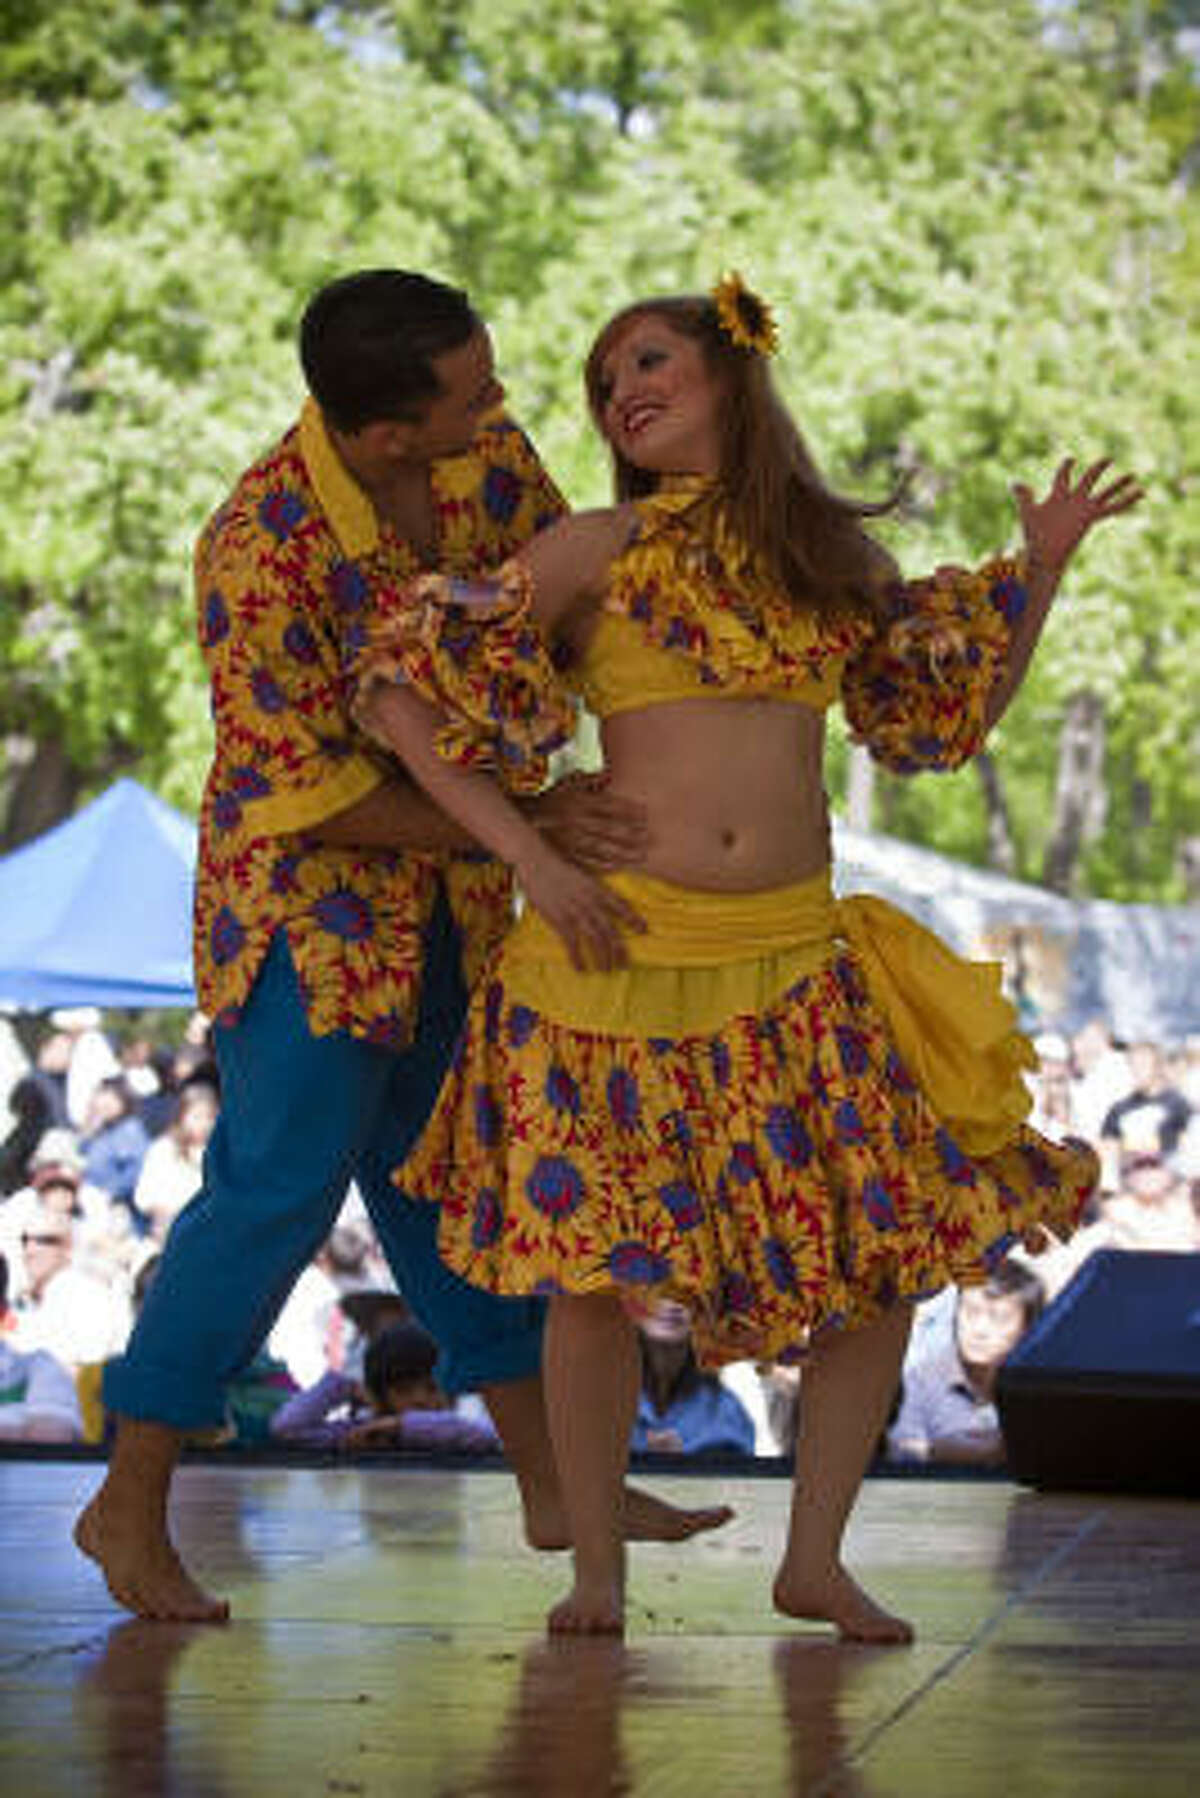 The Colombian Folkloric Ballet performs the fandago at the 13th Annual Bayou City Art Festival Memorial Park, in Houston. The festival was a three day, one-of-a-kind outdoor gallery that features fine juried art by 300 top galleried artists from across the country. The festival also had an interactive community mural project open to all festival patrons, an array of multicultural performances on the Houston Arts Alliance stage, and wine and cuisines from all around the world.